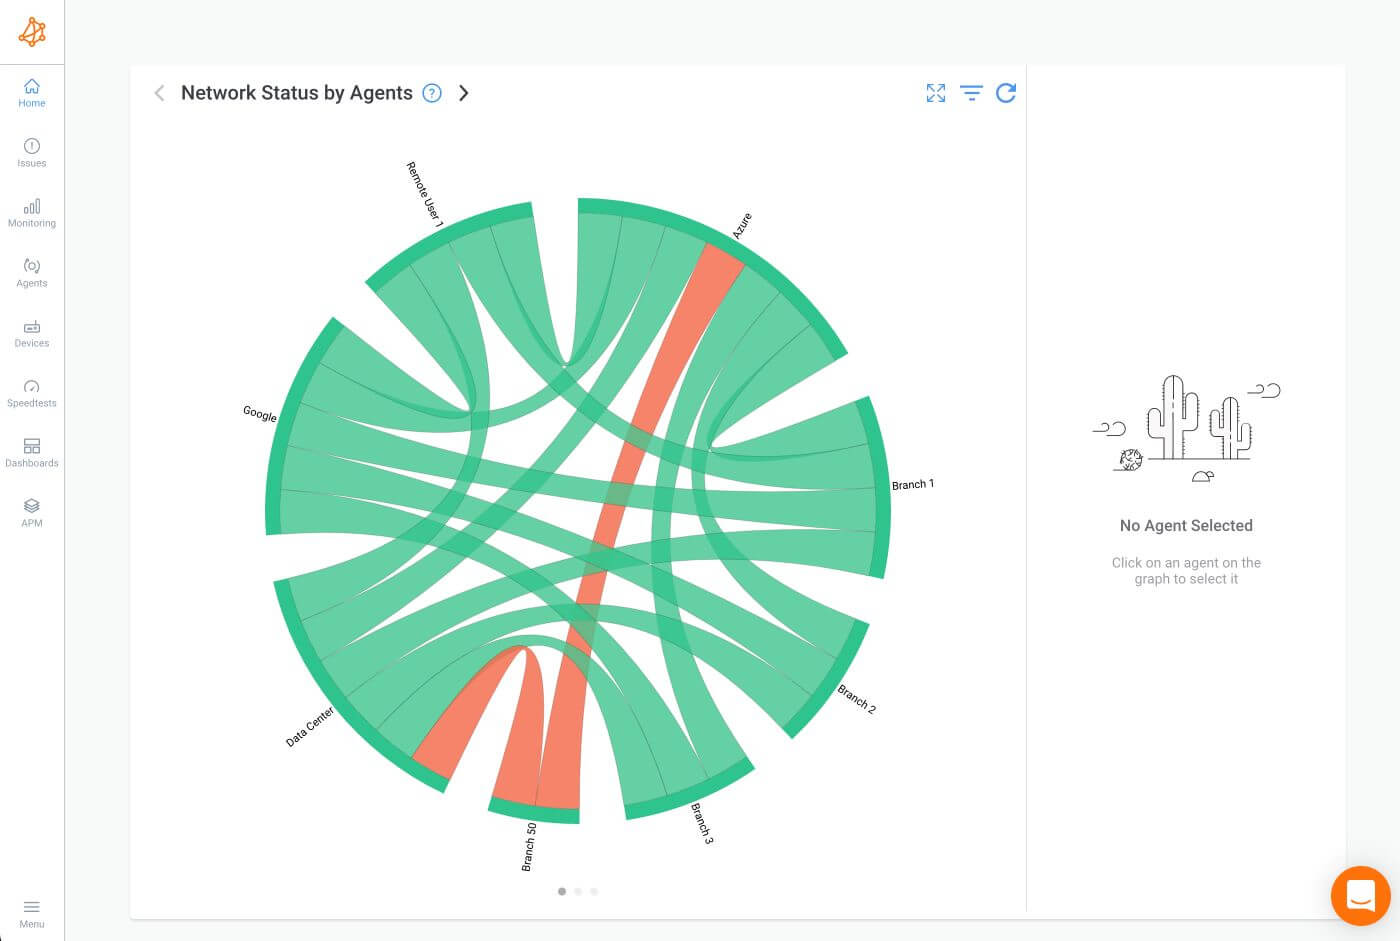 Obkio’s Network Performance Monitoring Tool Home Page